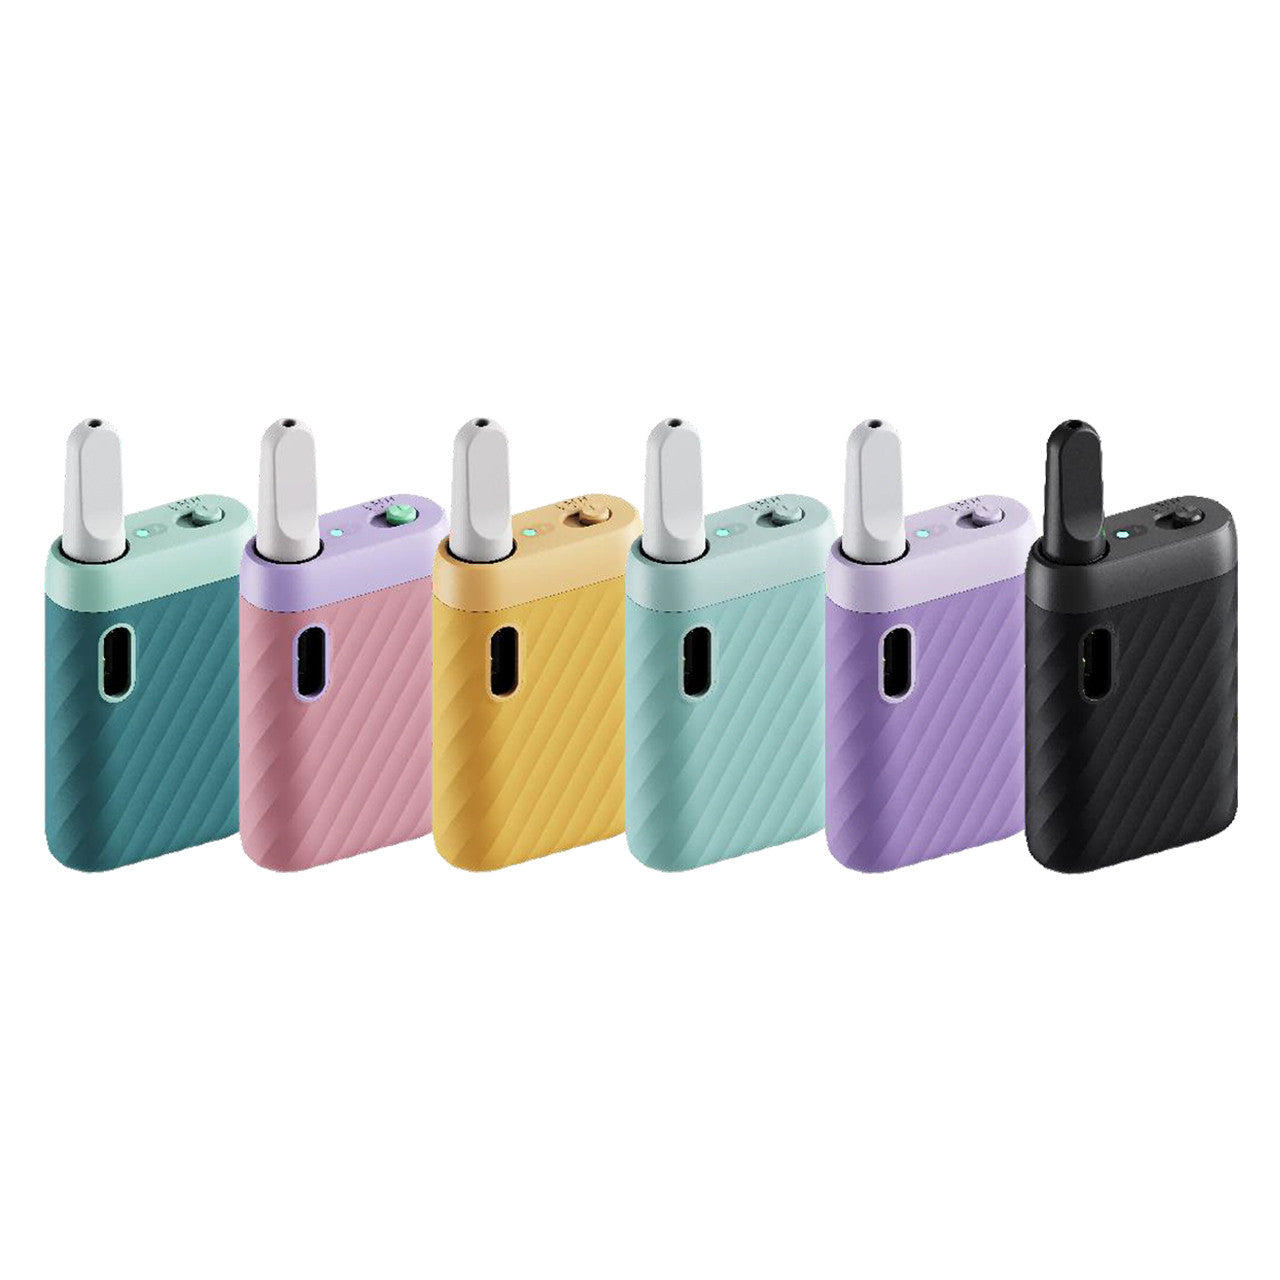 CCELL Sandwave 510 Battery Colors